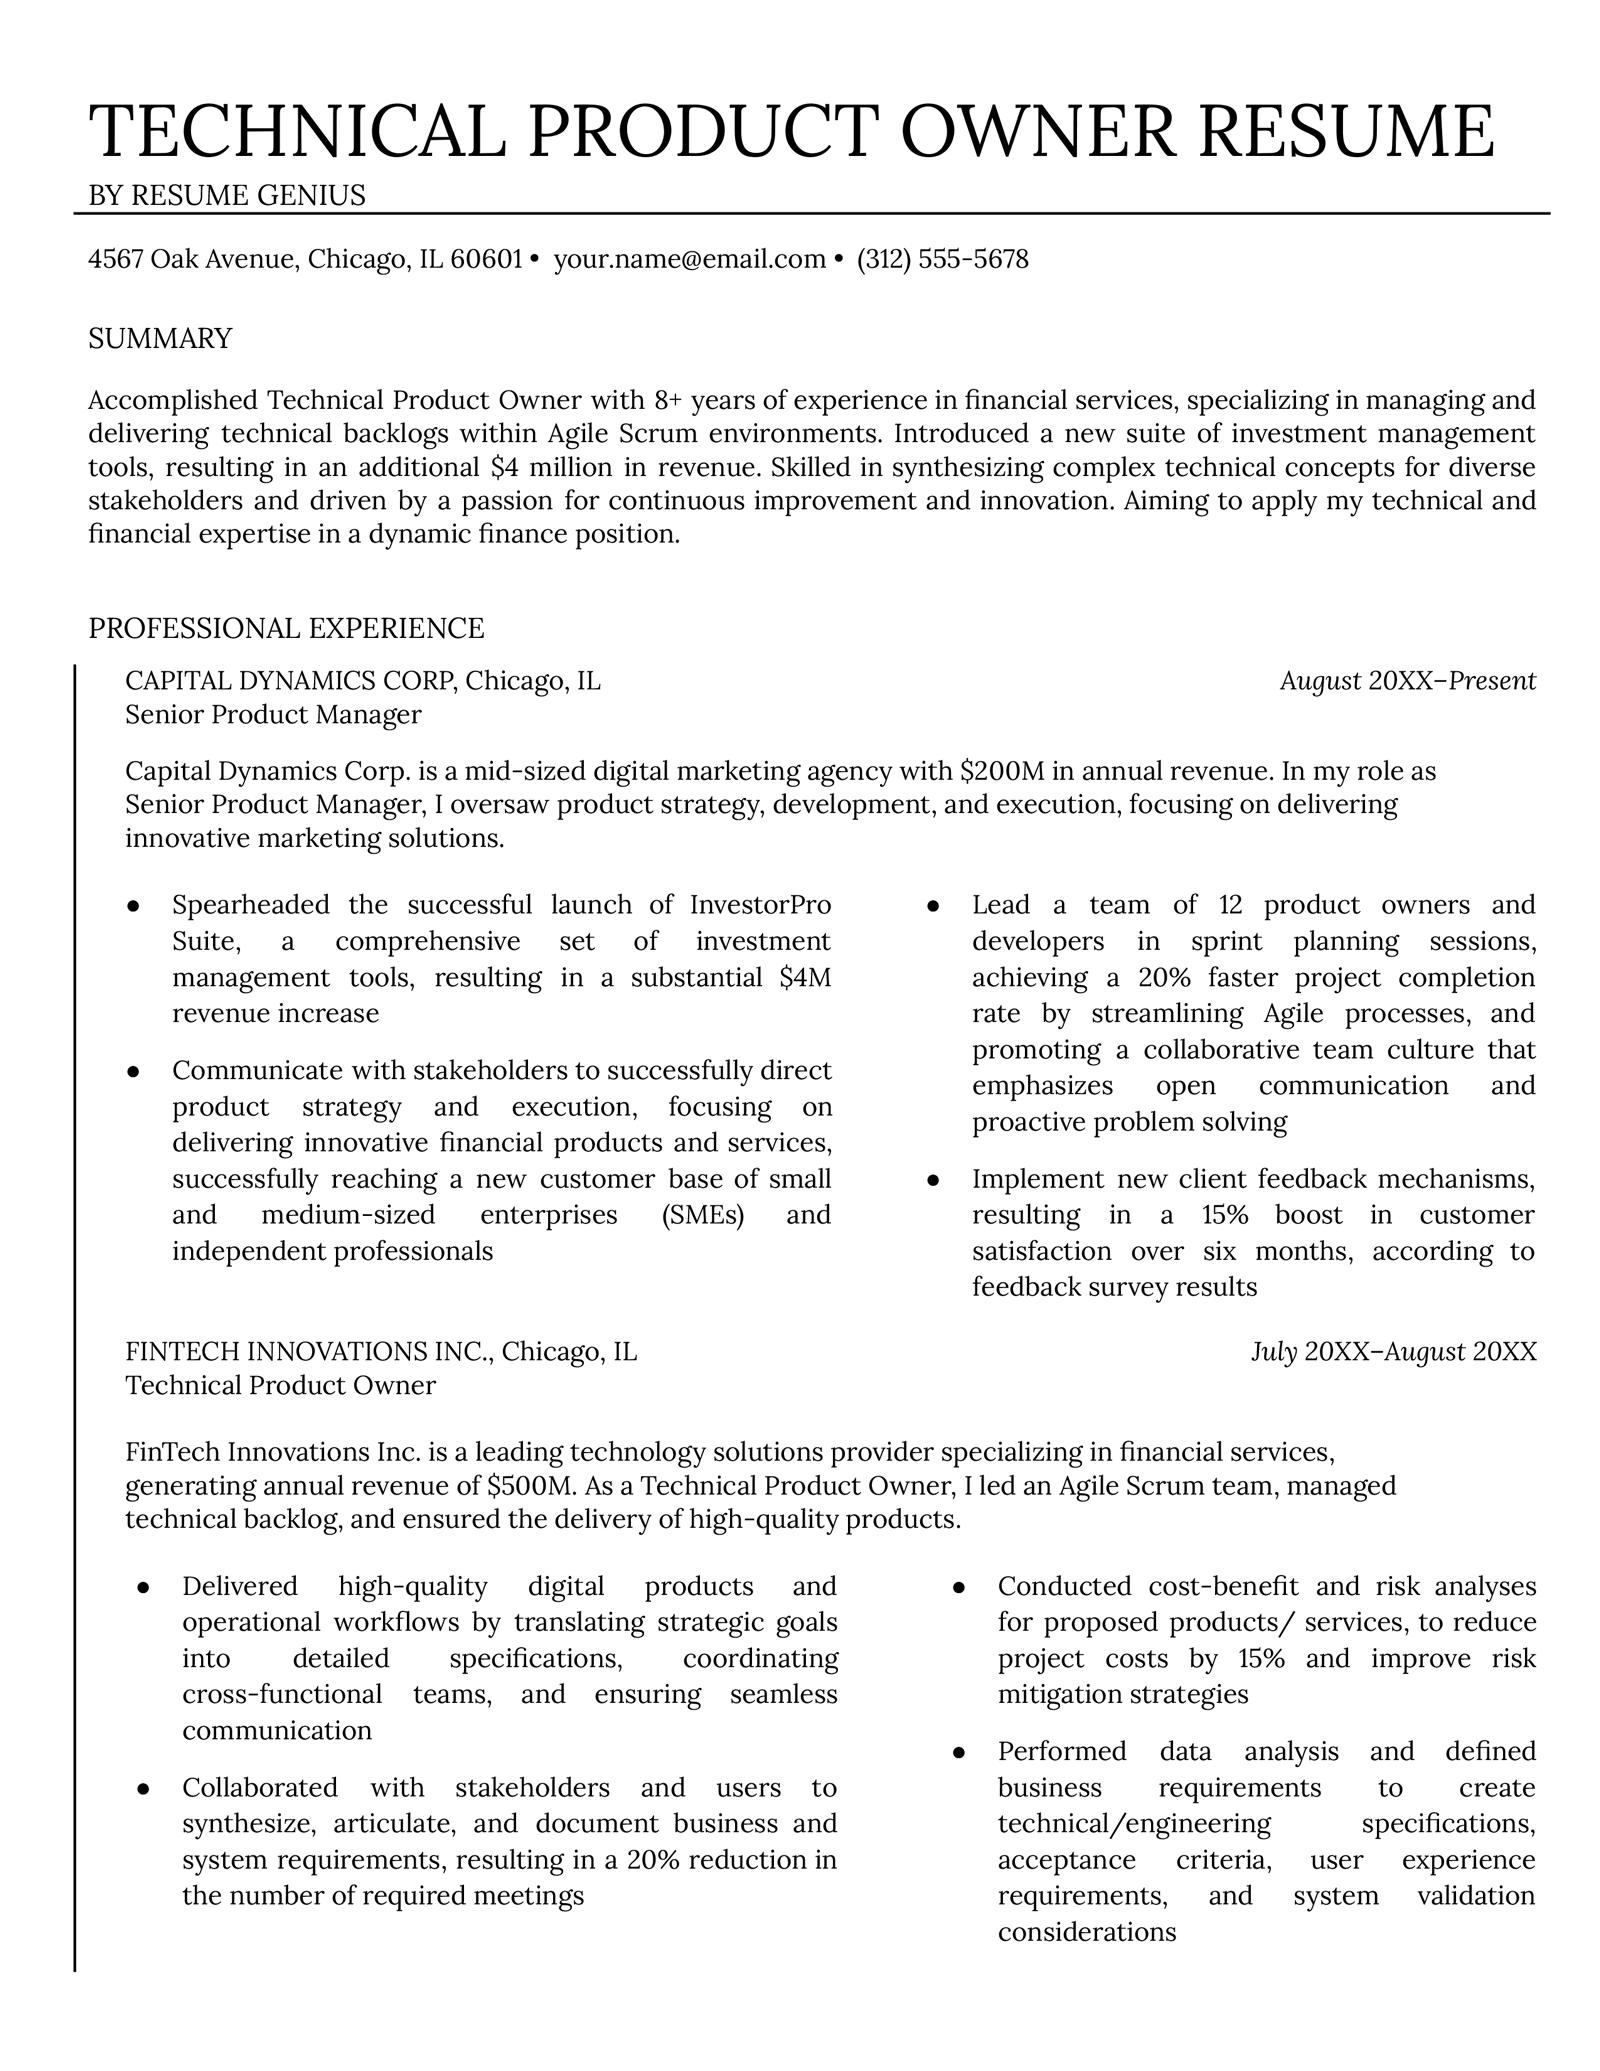 technical product owner resume example - FInance Sector (experienced)